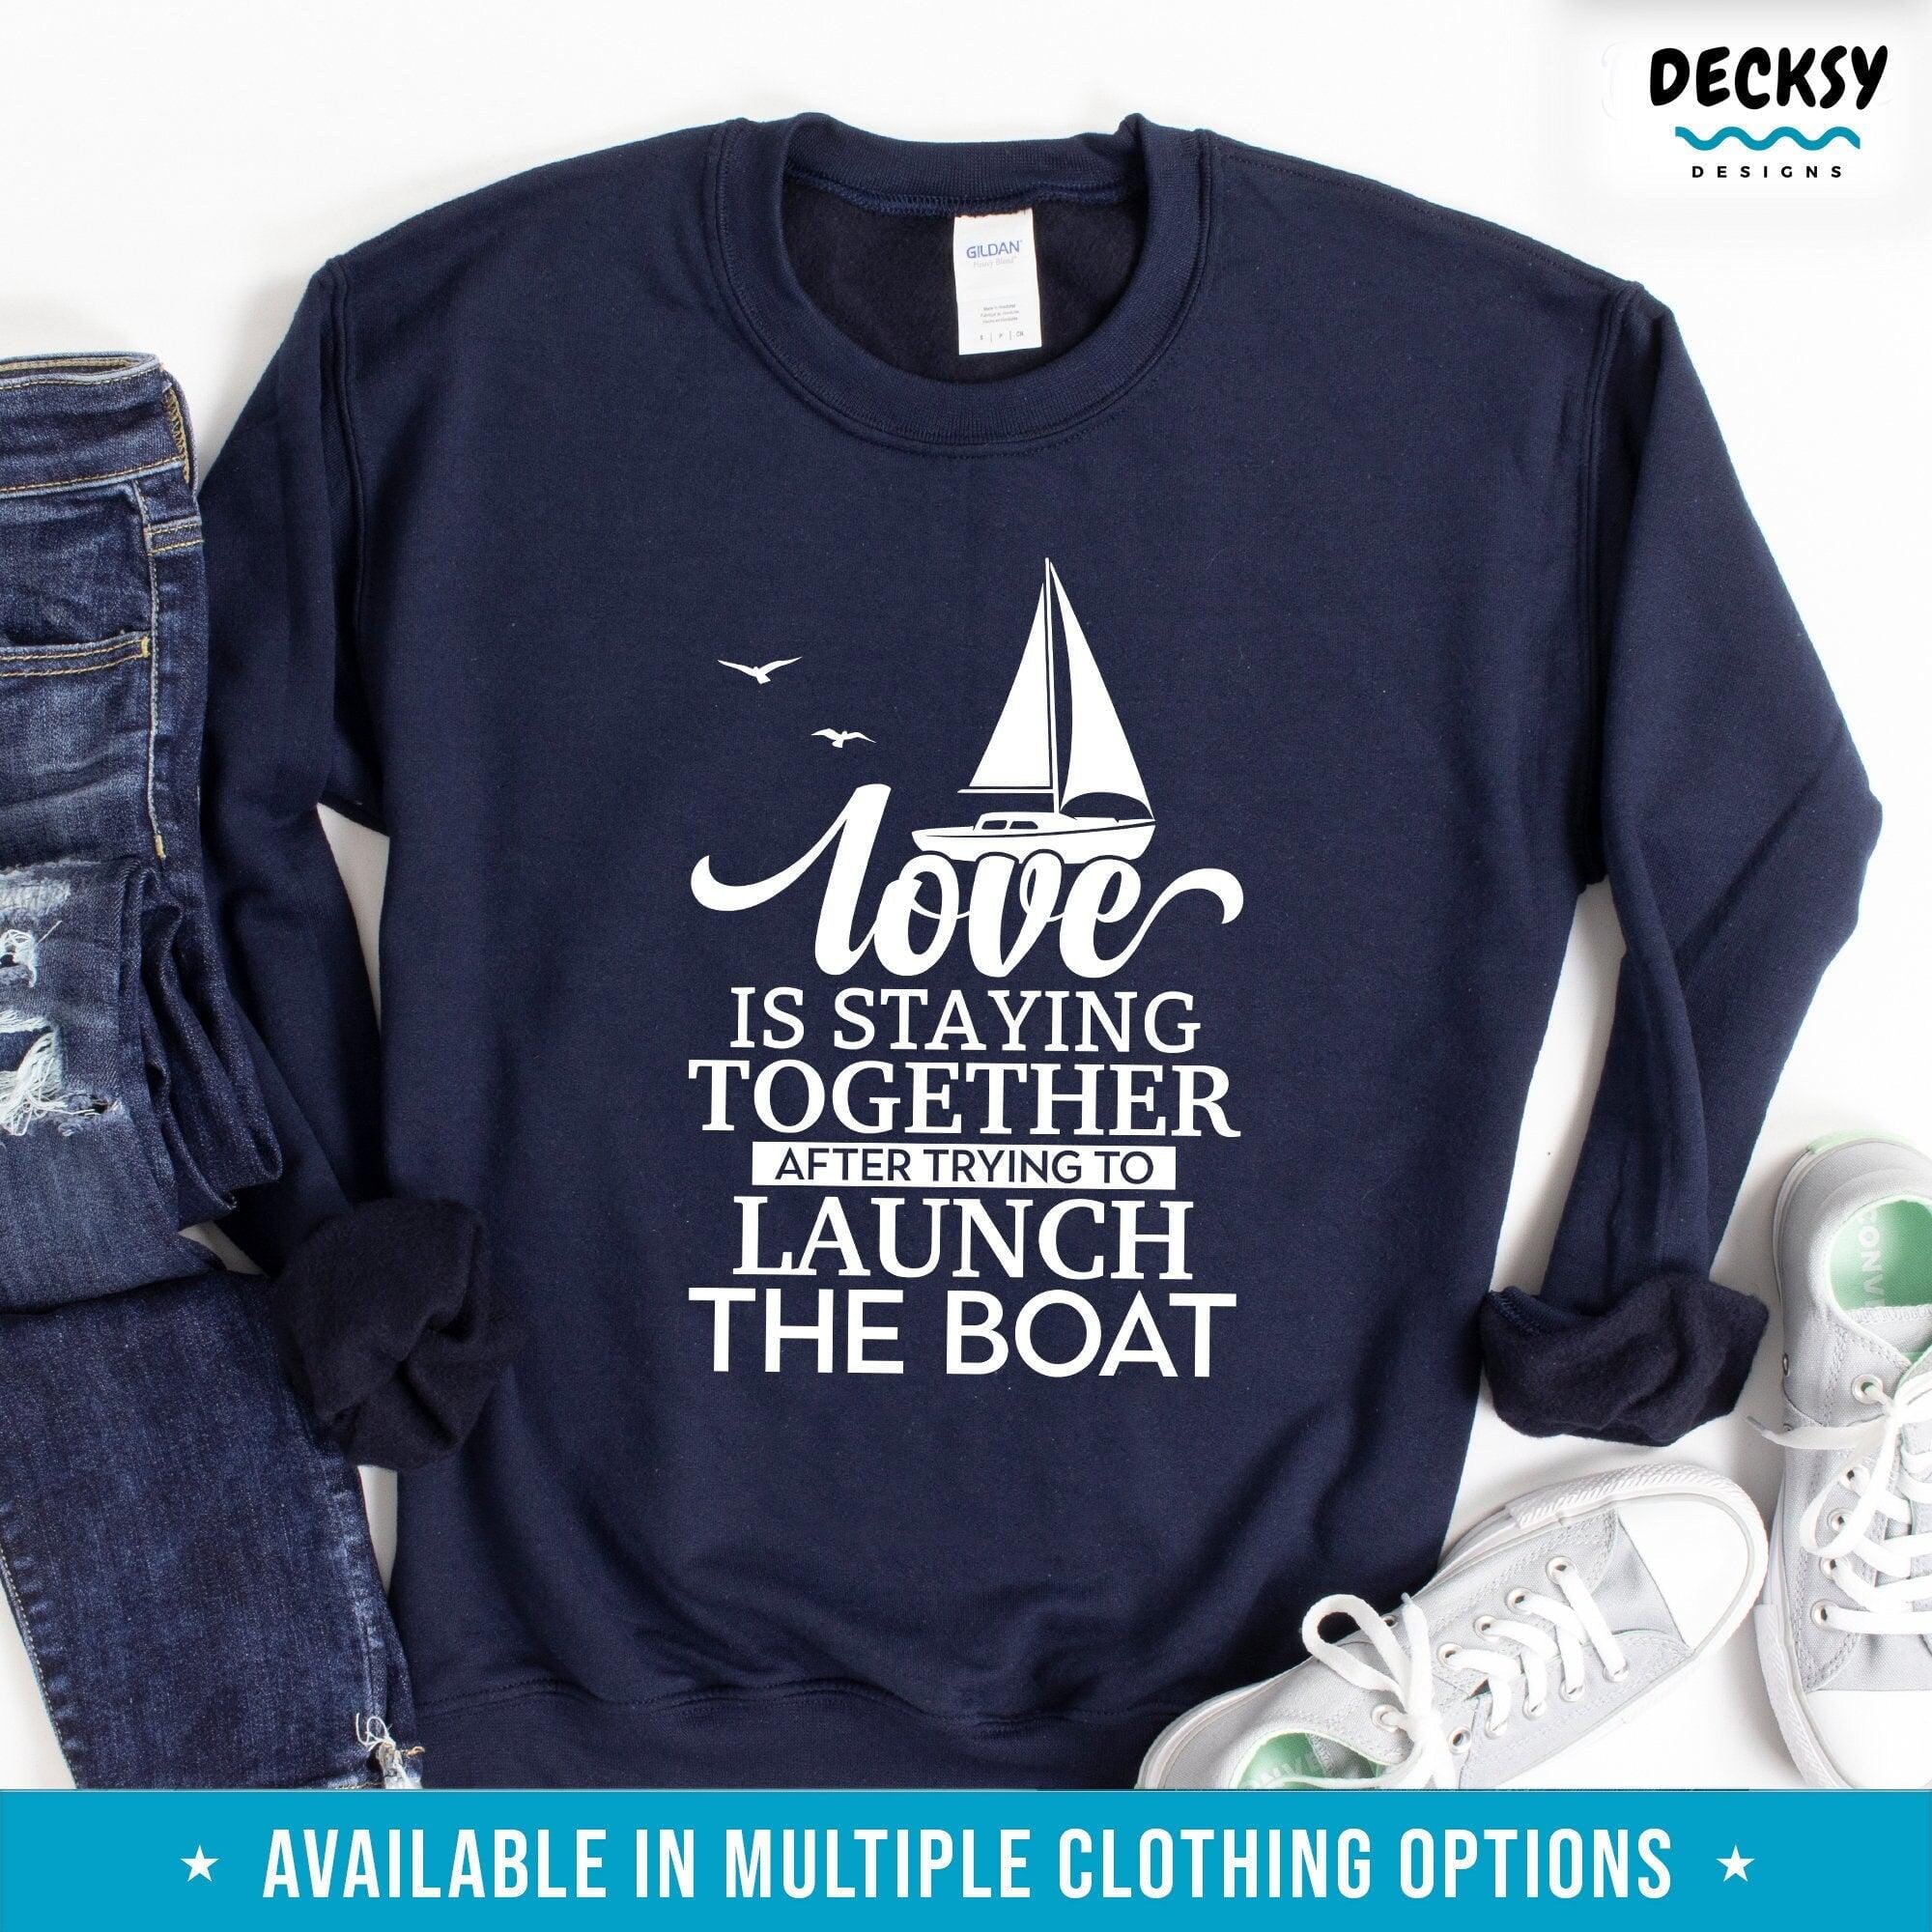 Sailing Tshirt, Boat Lover Gift-Clothing:Gender-Neutral Adult Clothing:Tops & Tees:T-shirts:Graphic Tees-DecksyDesigns